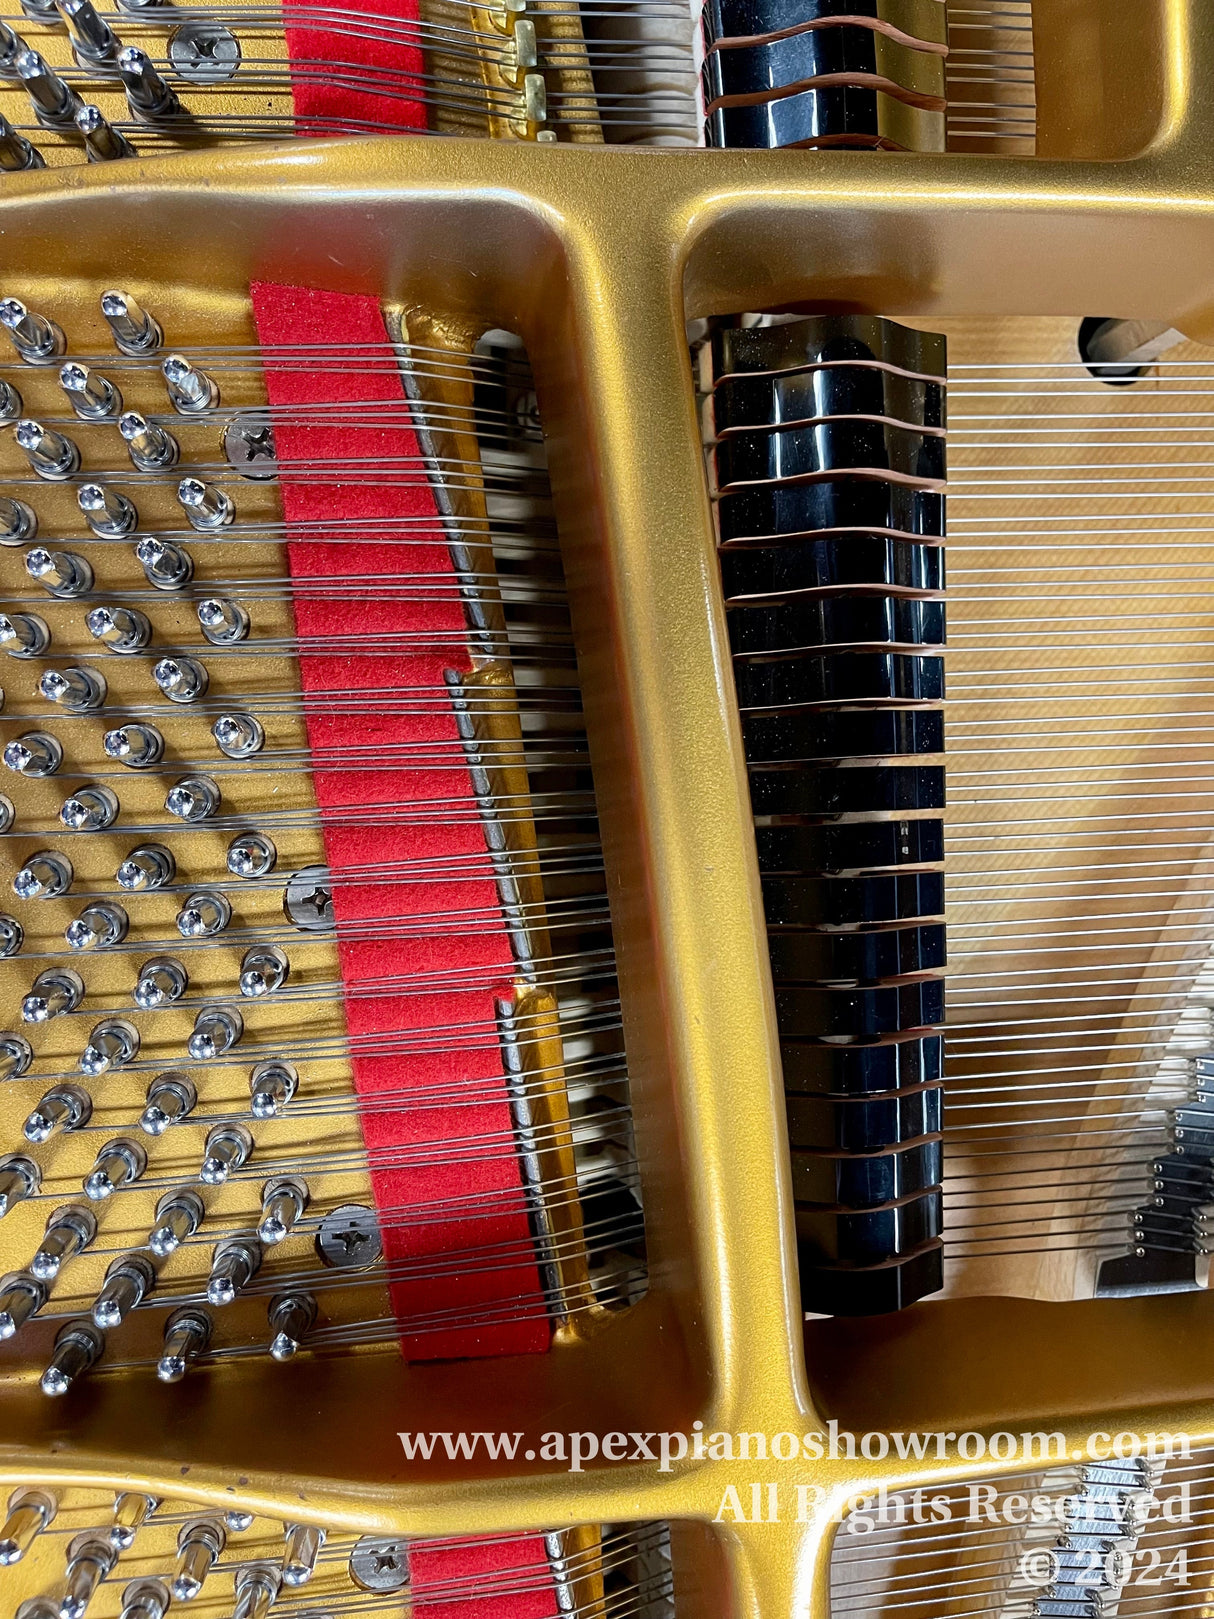 Interior of a grand piano showing gold-colored frame, strings, and tuning pins with red felt dampers and black soundboard — intricate details of piano craftsmanship visible.